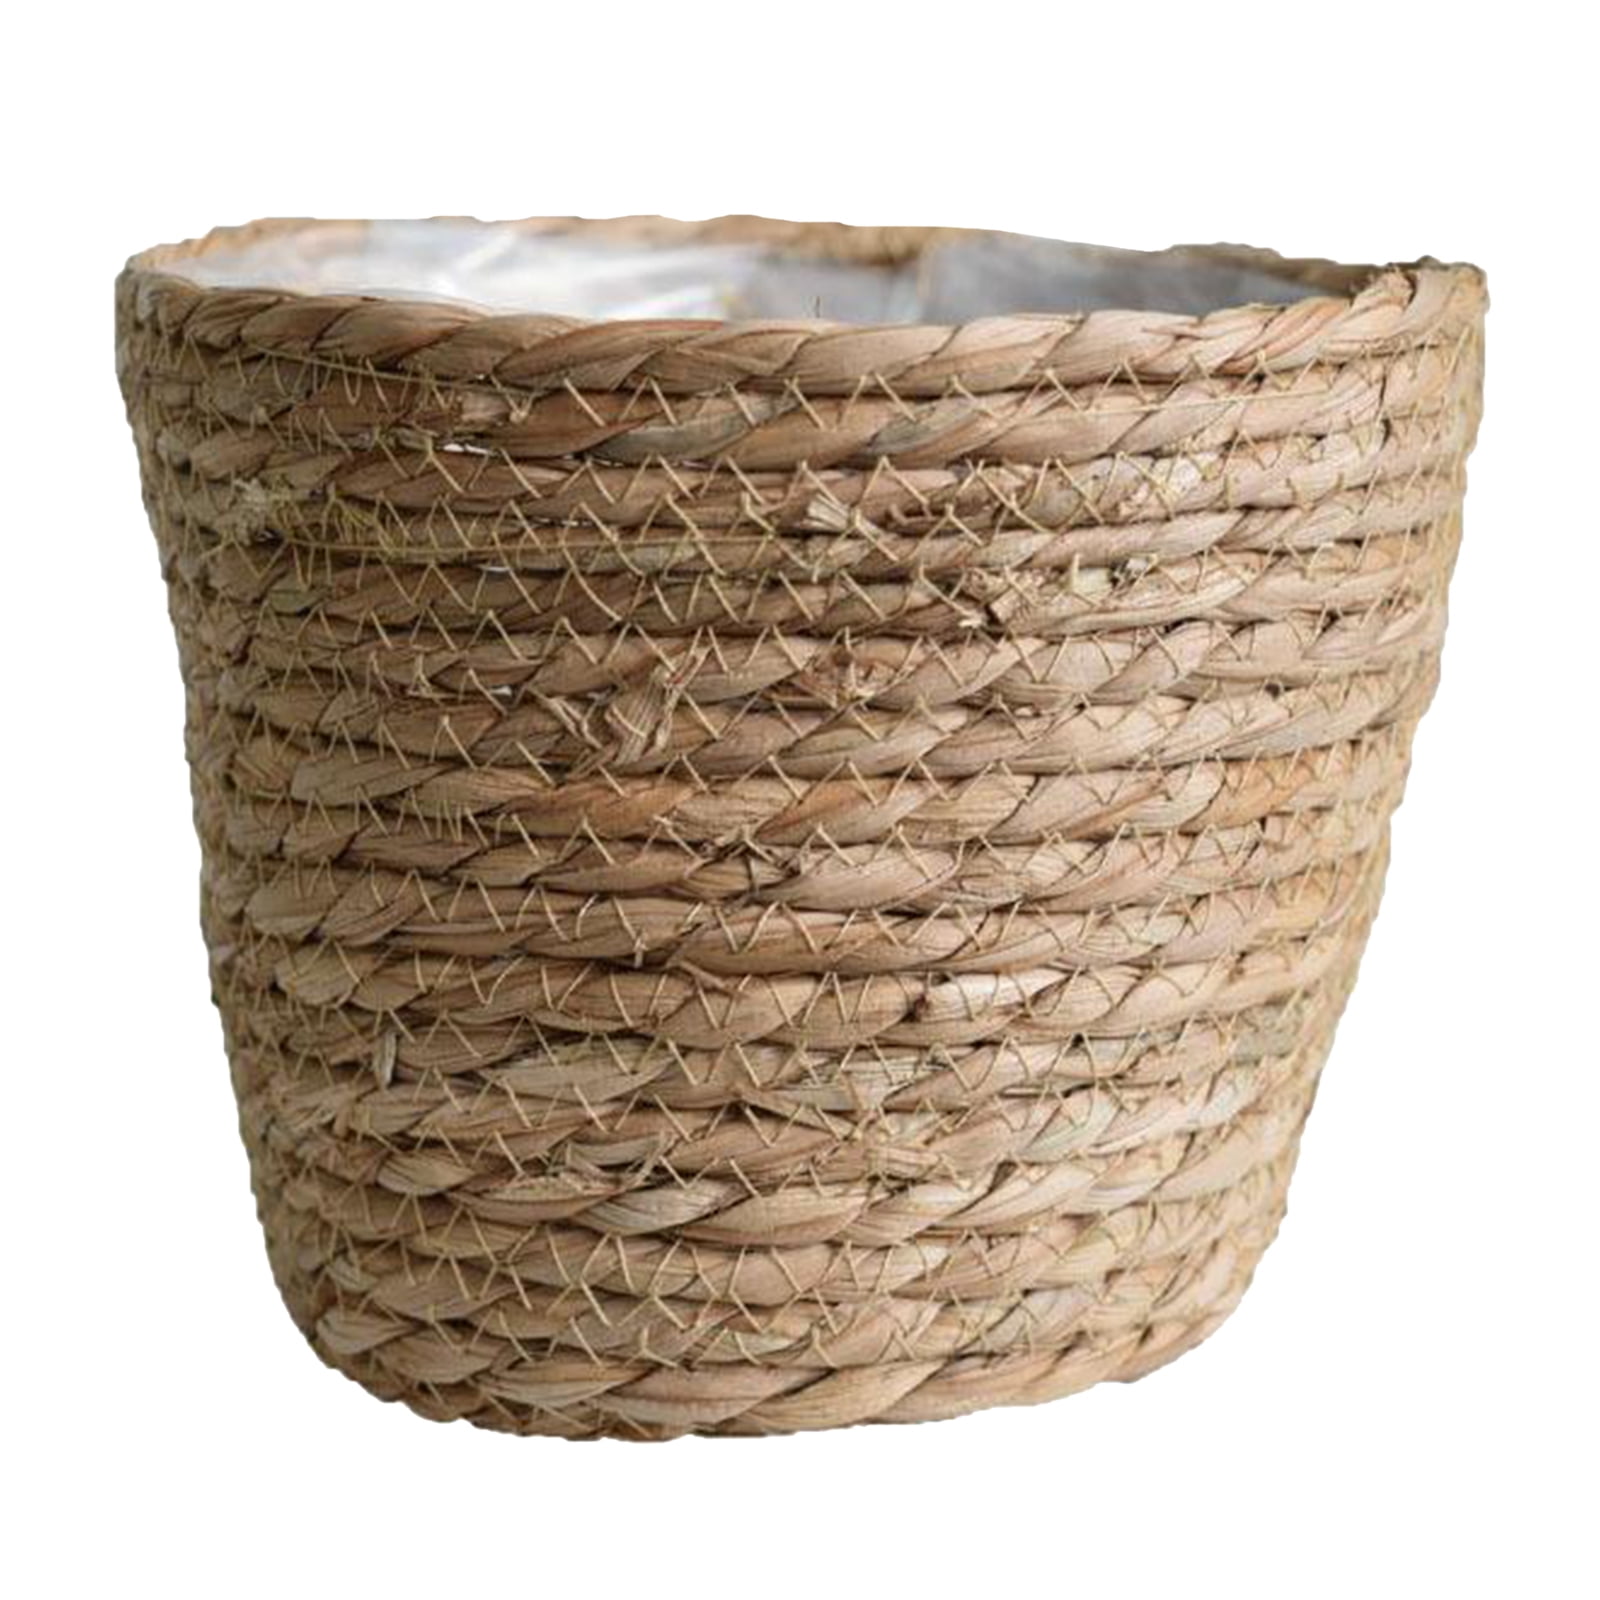 WIVAYE Seagrass Basket Planters,15 x 11cm Plant Basket with Liner Decorative Plant Pots Plant Containers Storage Basket for Indoor Outdoor